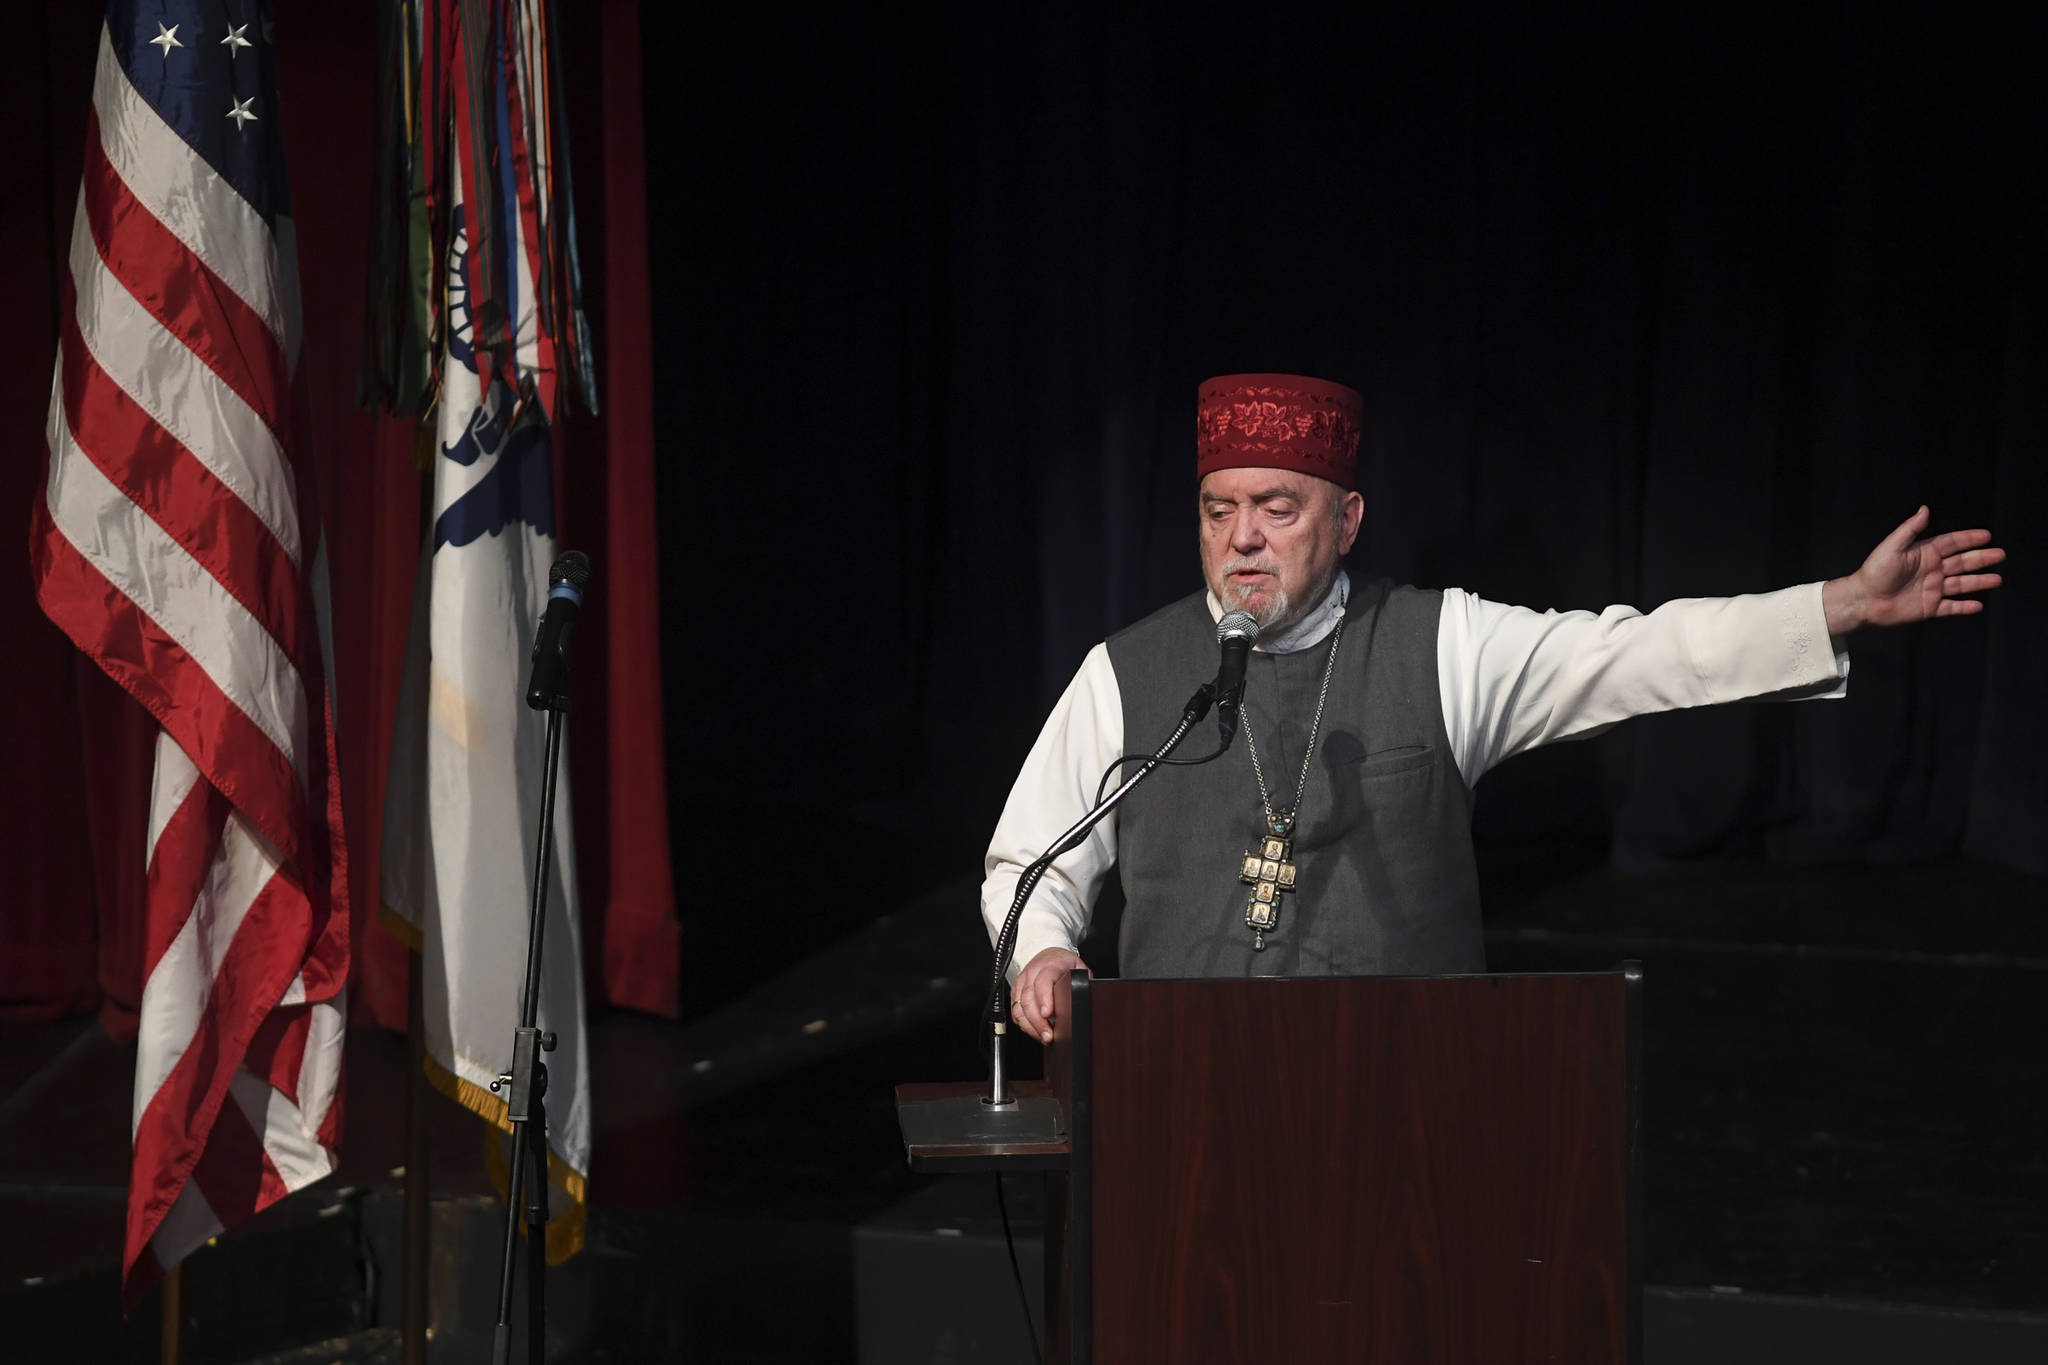 Father Michael Oleksa speaks during the memorial service for the Guardian Flight crew held at Juneau-Douglas High School: Yadaa.at Kalé on Friday, June 7, 2019. (Michael Penn | Juneau Empire)